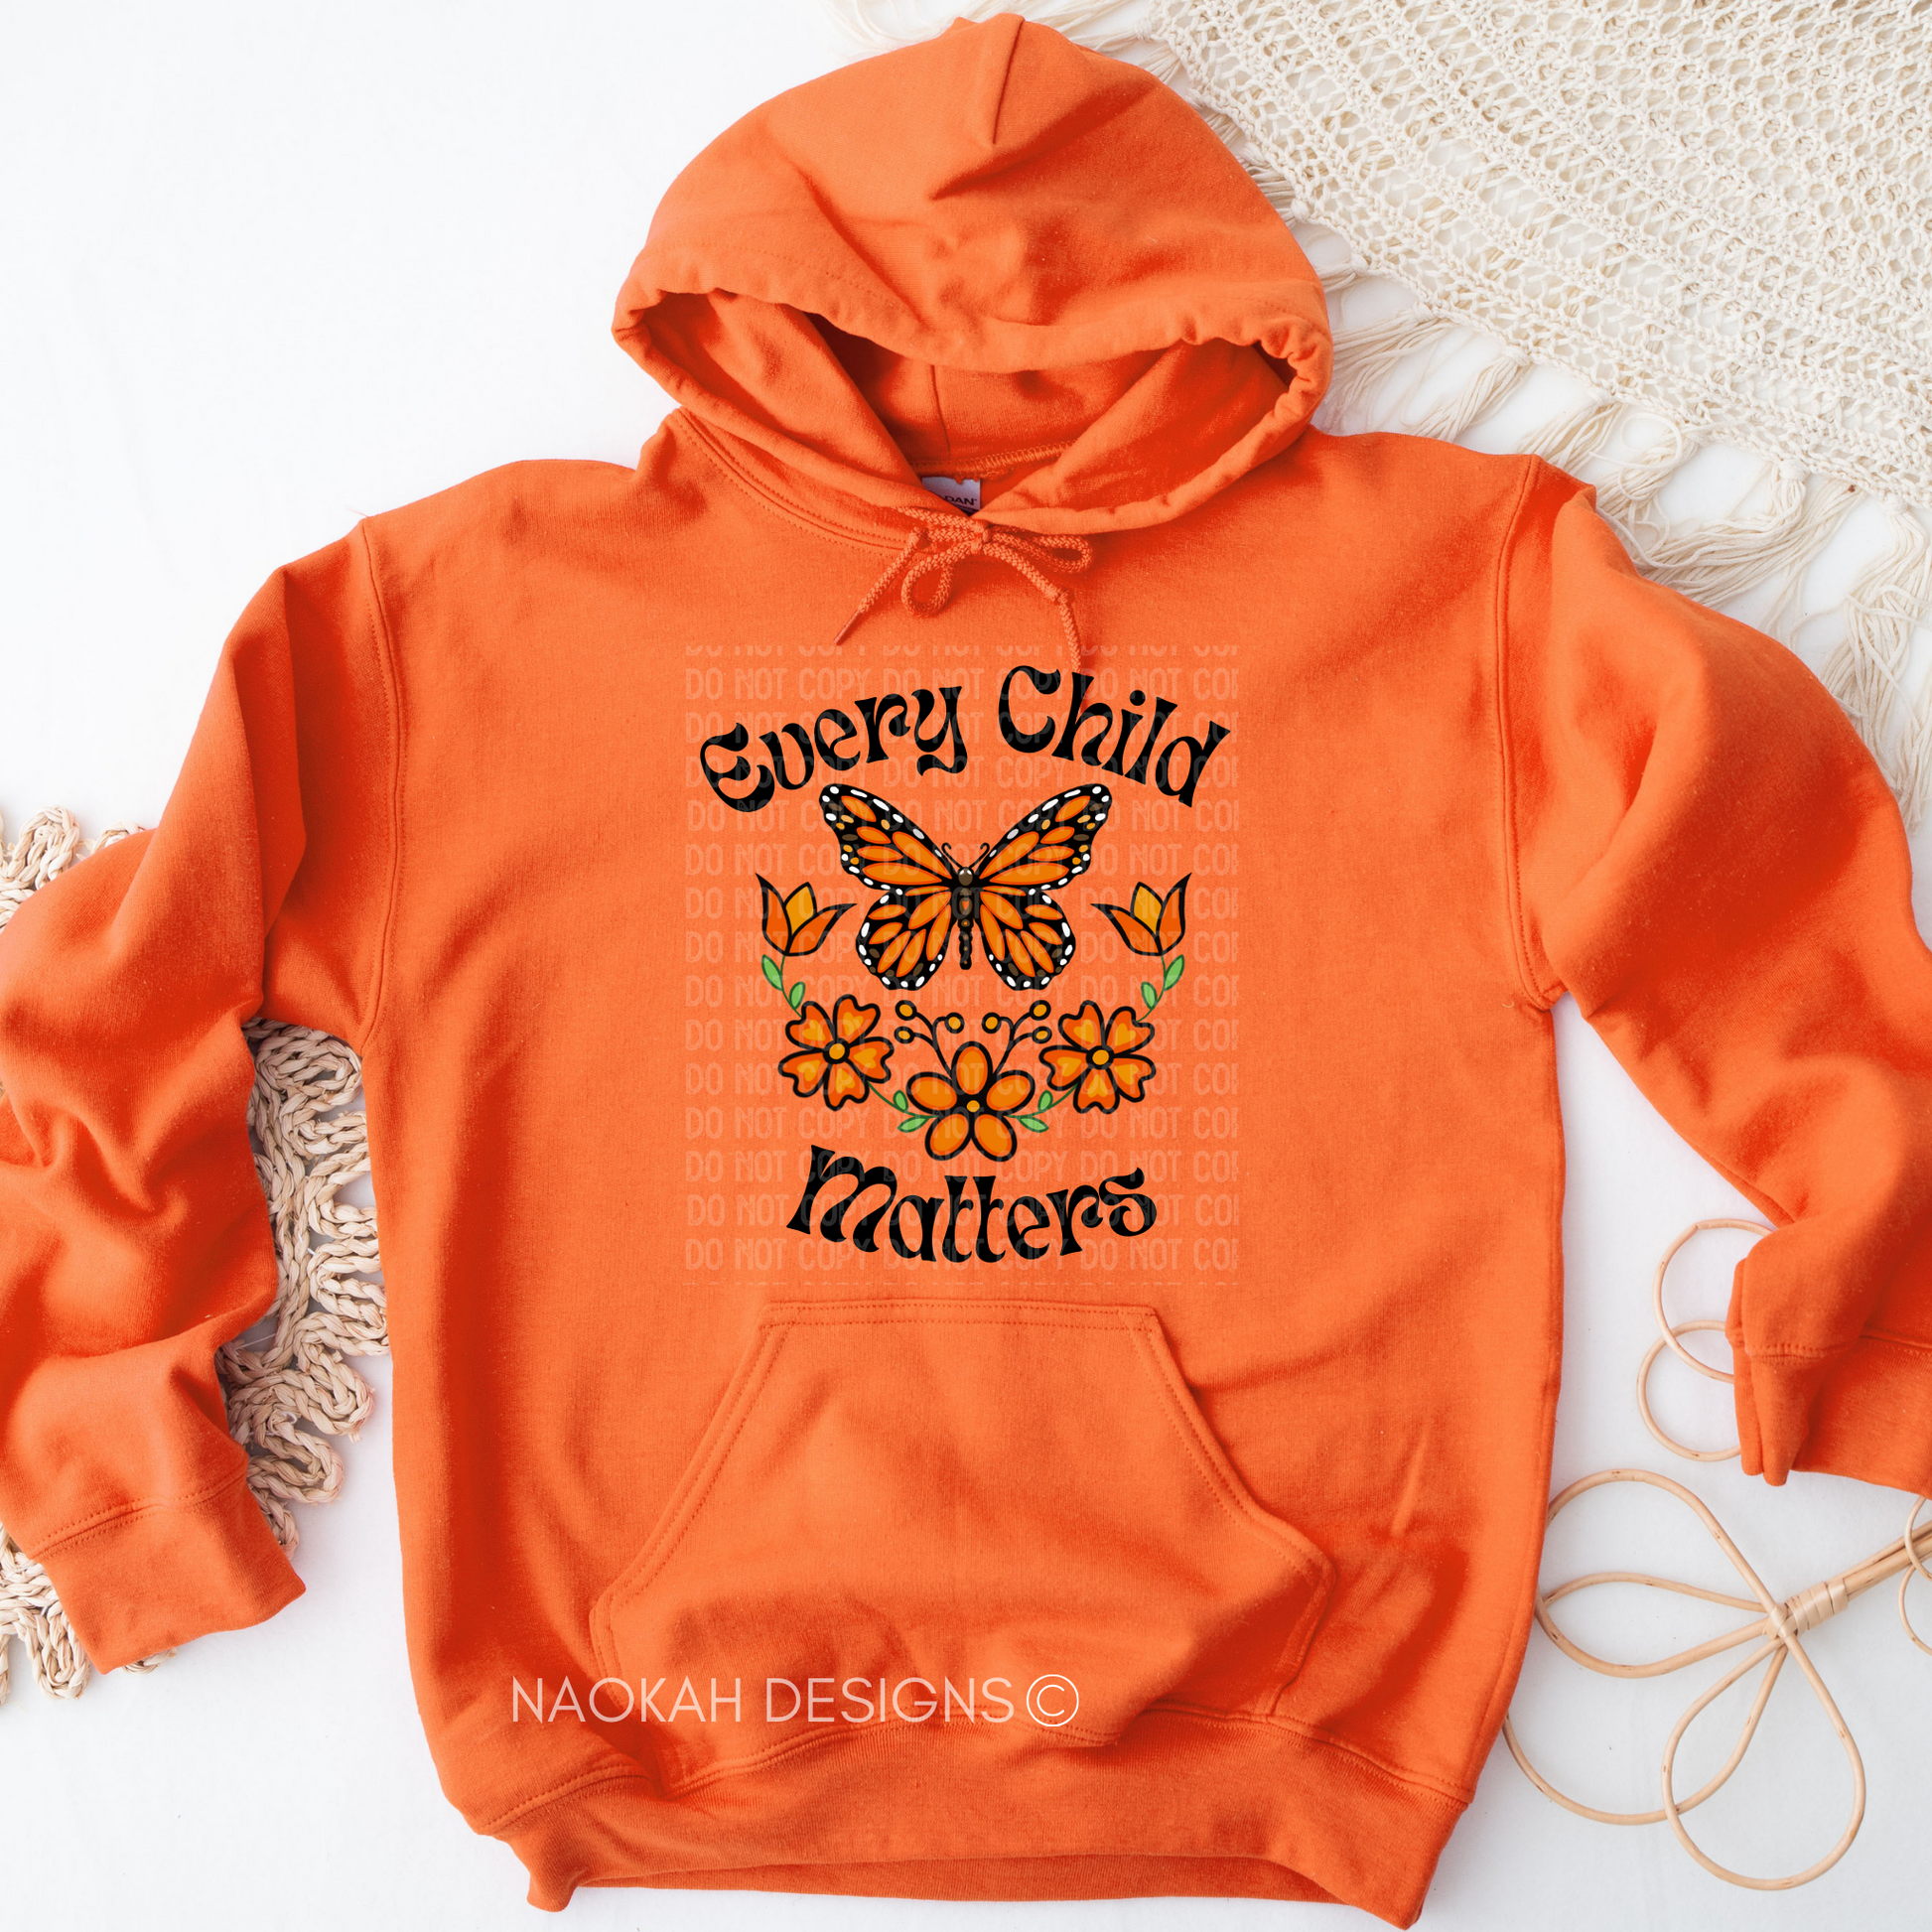 Every Child Matters Shirt Butterfly Design, PORTION DONATED, Orange Shirt Day Shirt, Indigenous Owned Shop, Truth and Reconciliation